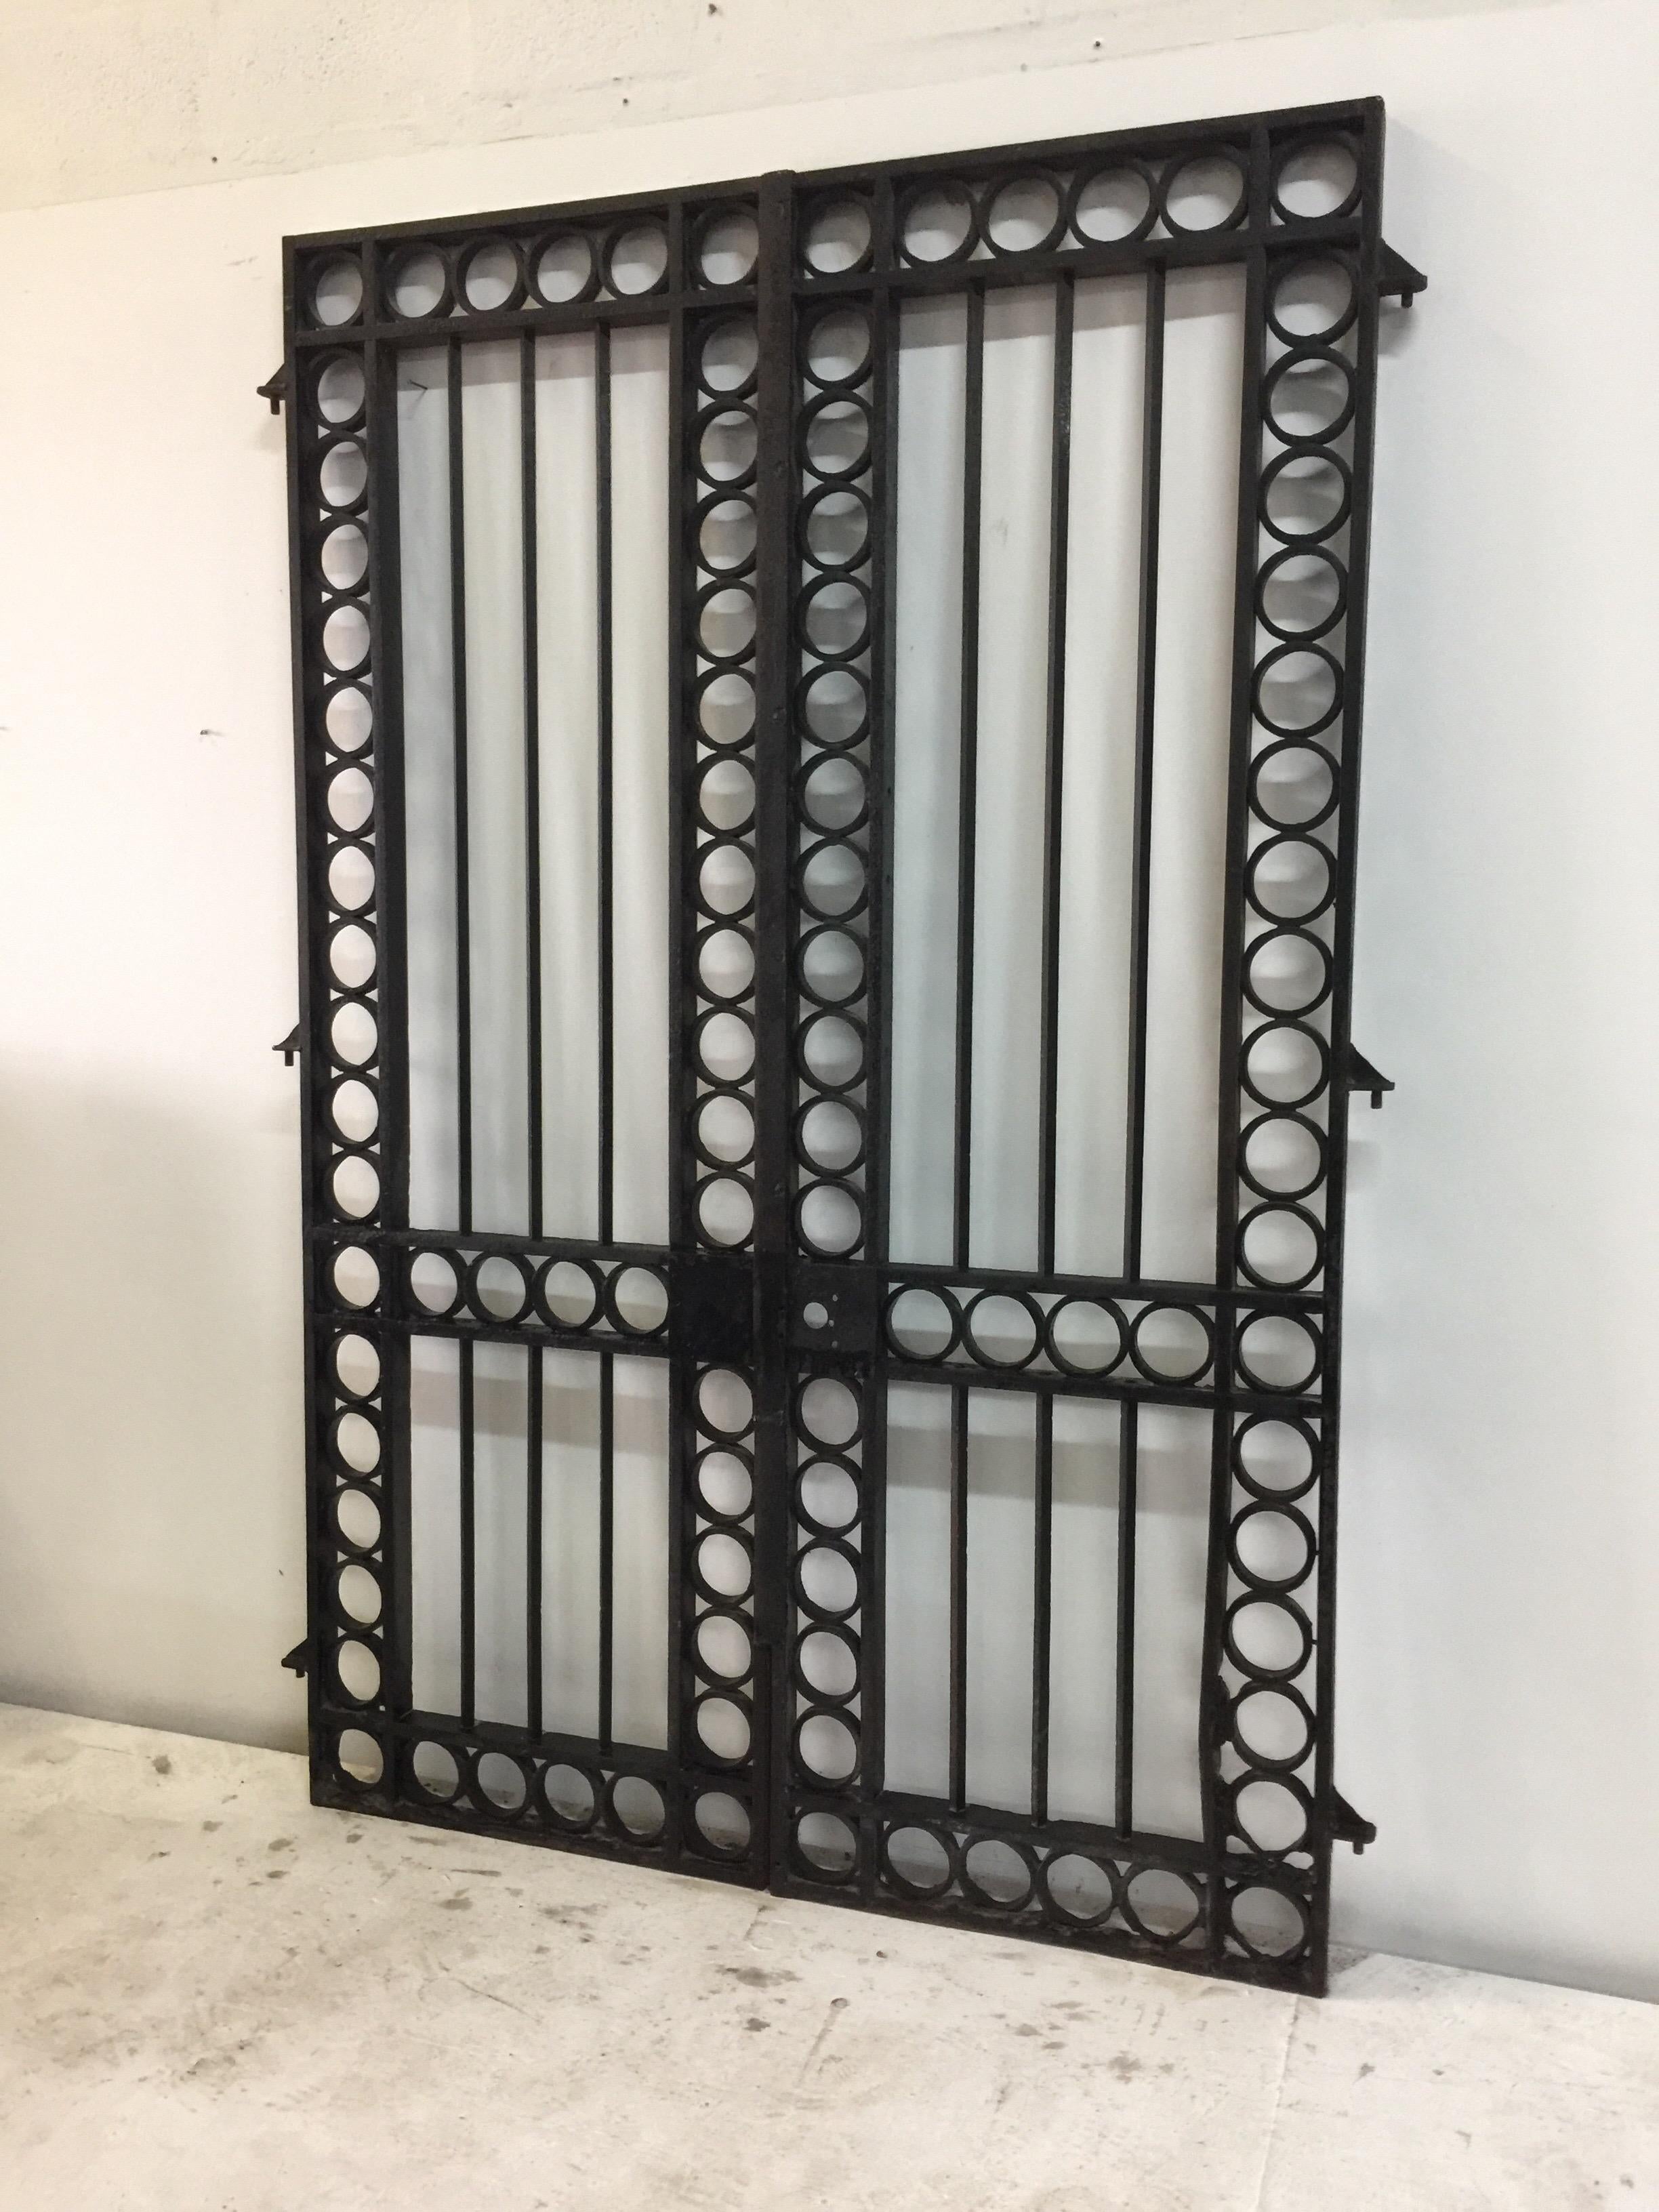 Pair of incredible iron entrance gates from the South of France, circa 19th century. From the estate of the Late Amy Perlin, a well known collector of antiques from around the globe. These gates are extremely heavy and were apparently used near the